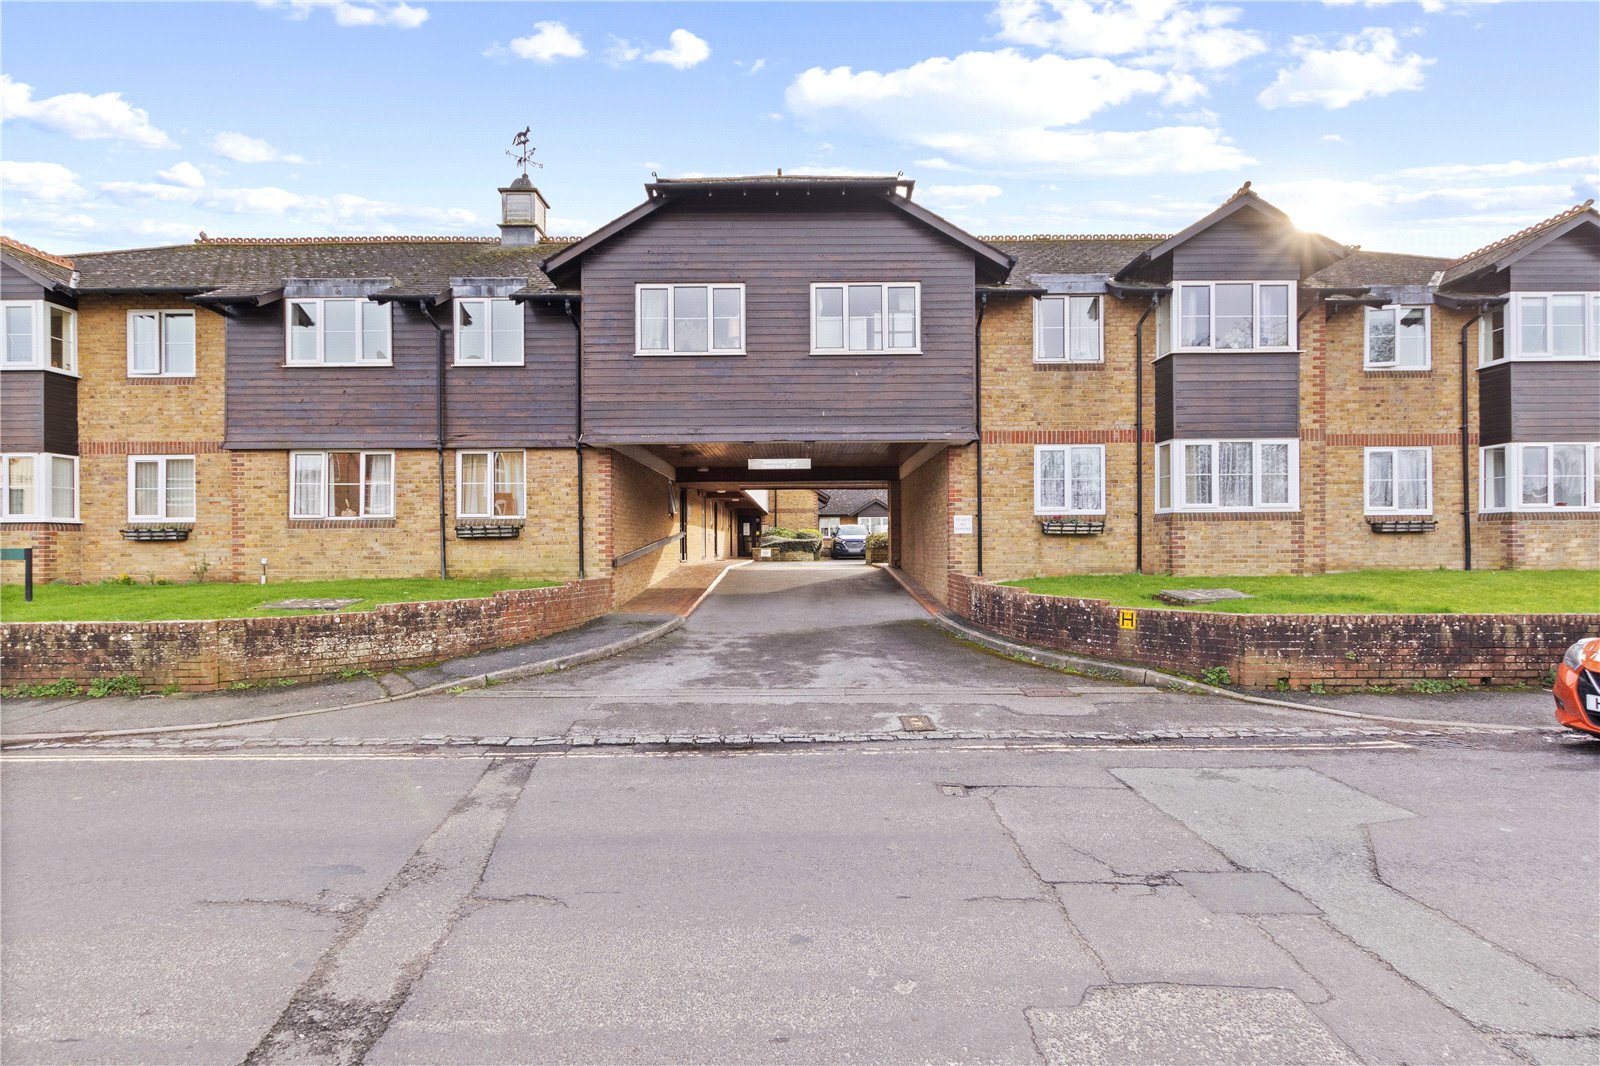 1 bed apartment for sale in Nyetimber Lane, Pagham - Property Image 1